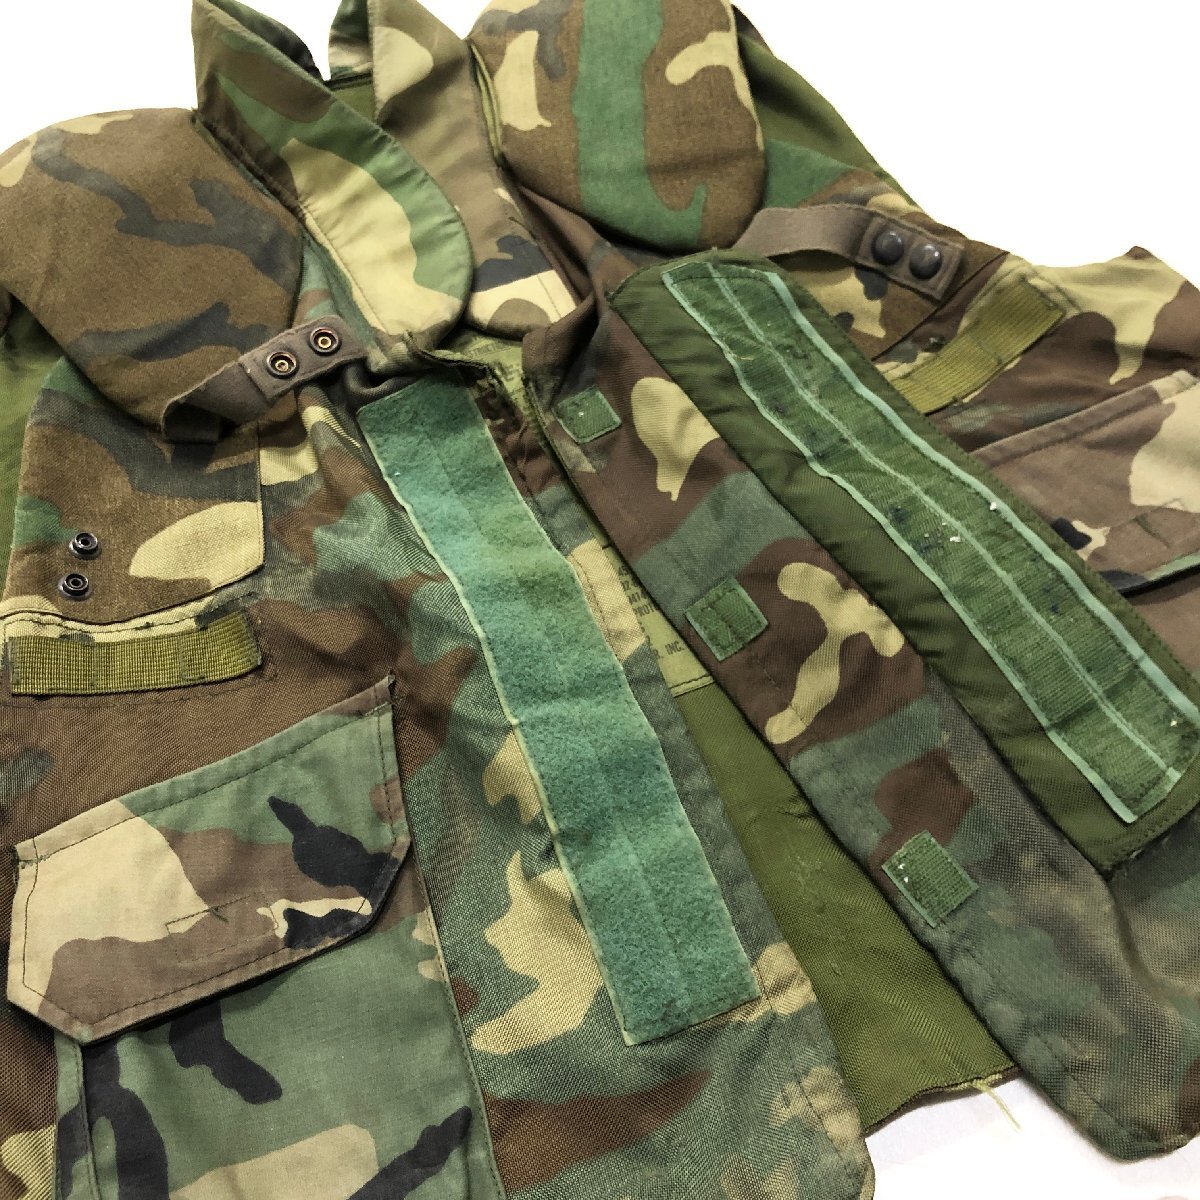 *80s JAY DEE MILITARYWEAR body armor - army military choki the best camouflage camouflage ARMY Vintage men's size L 1.01.*